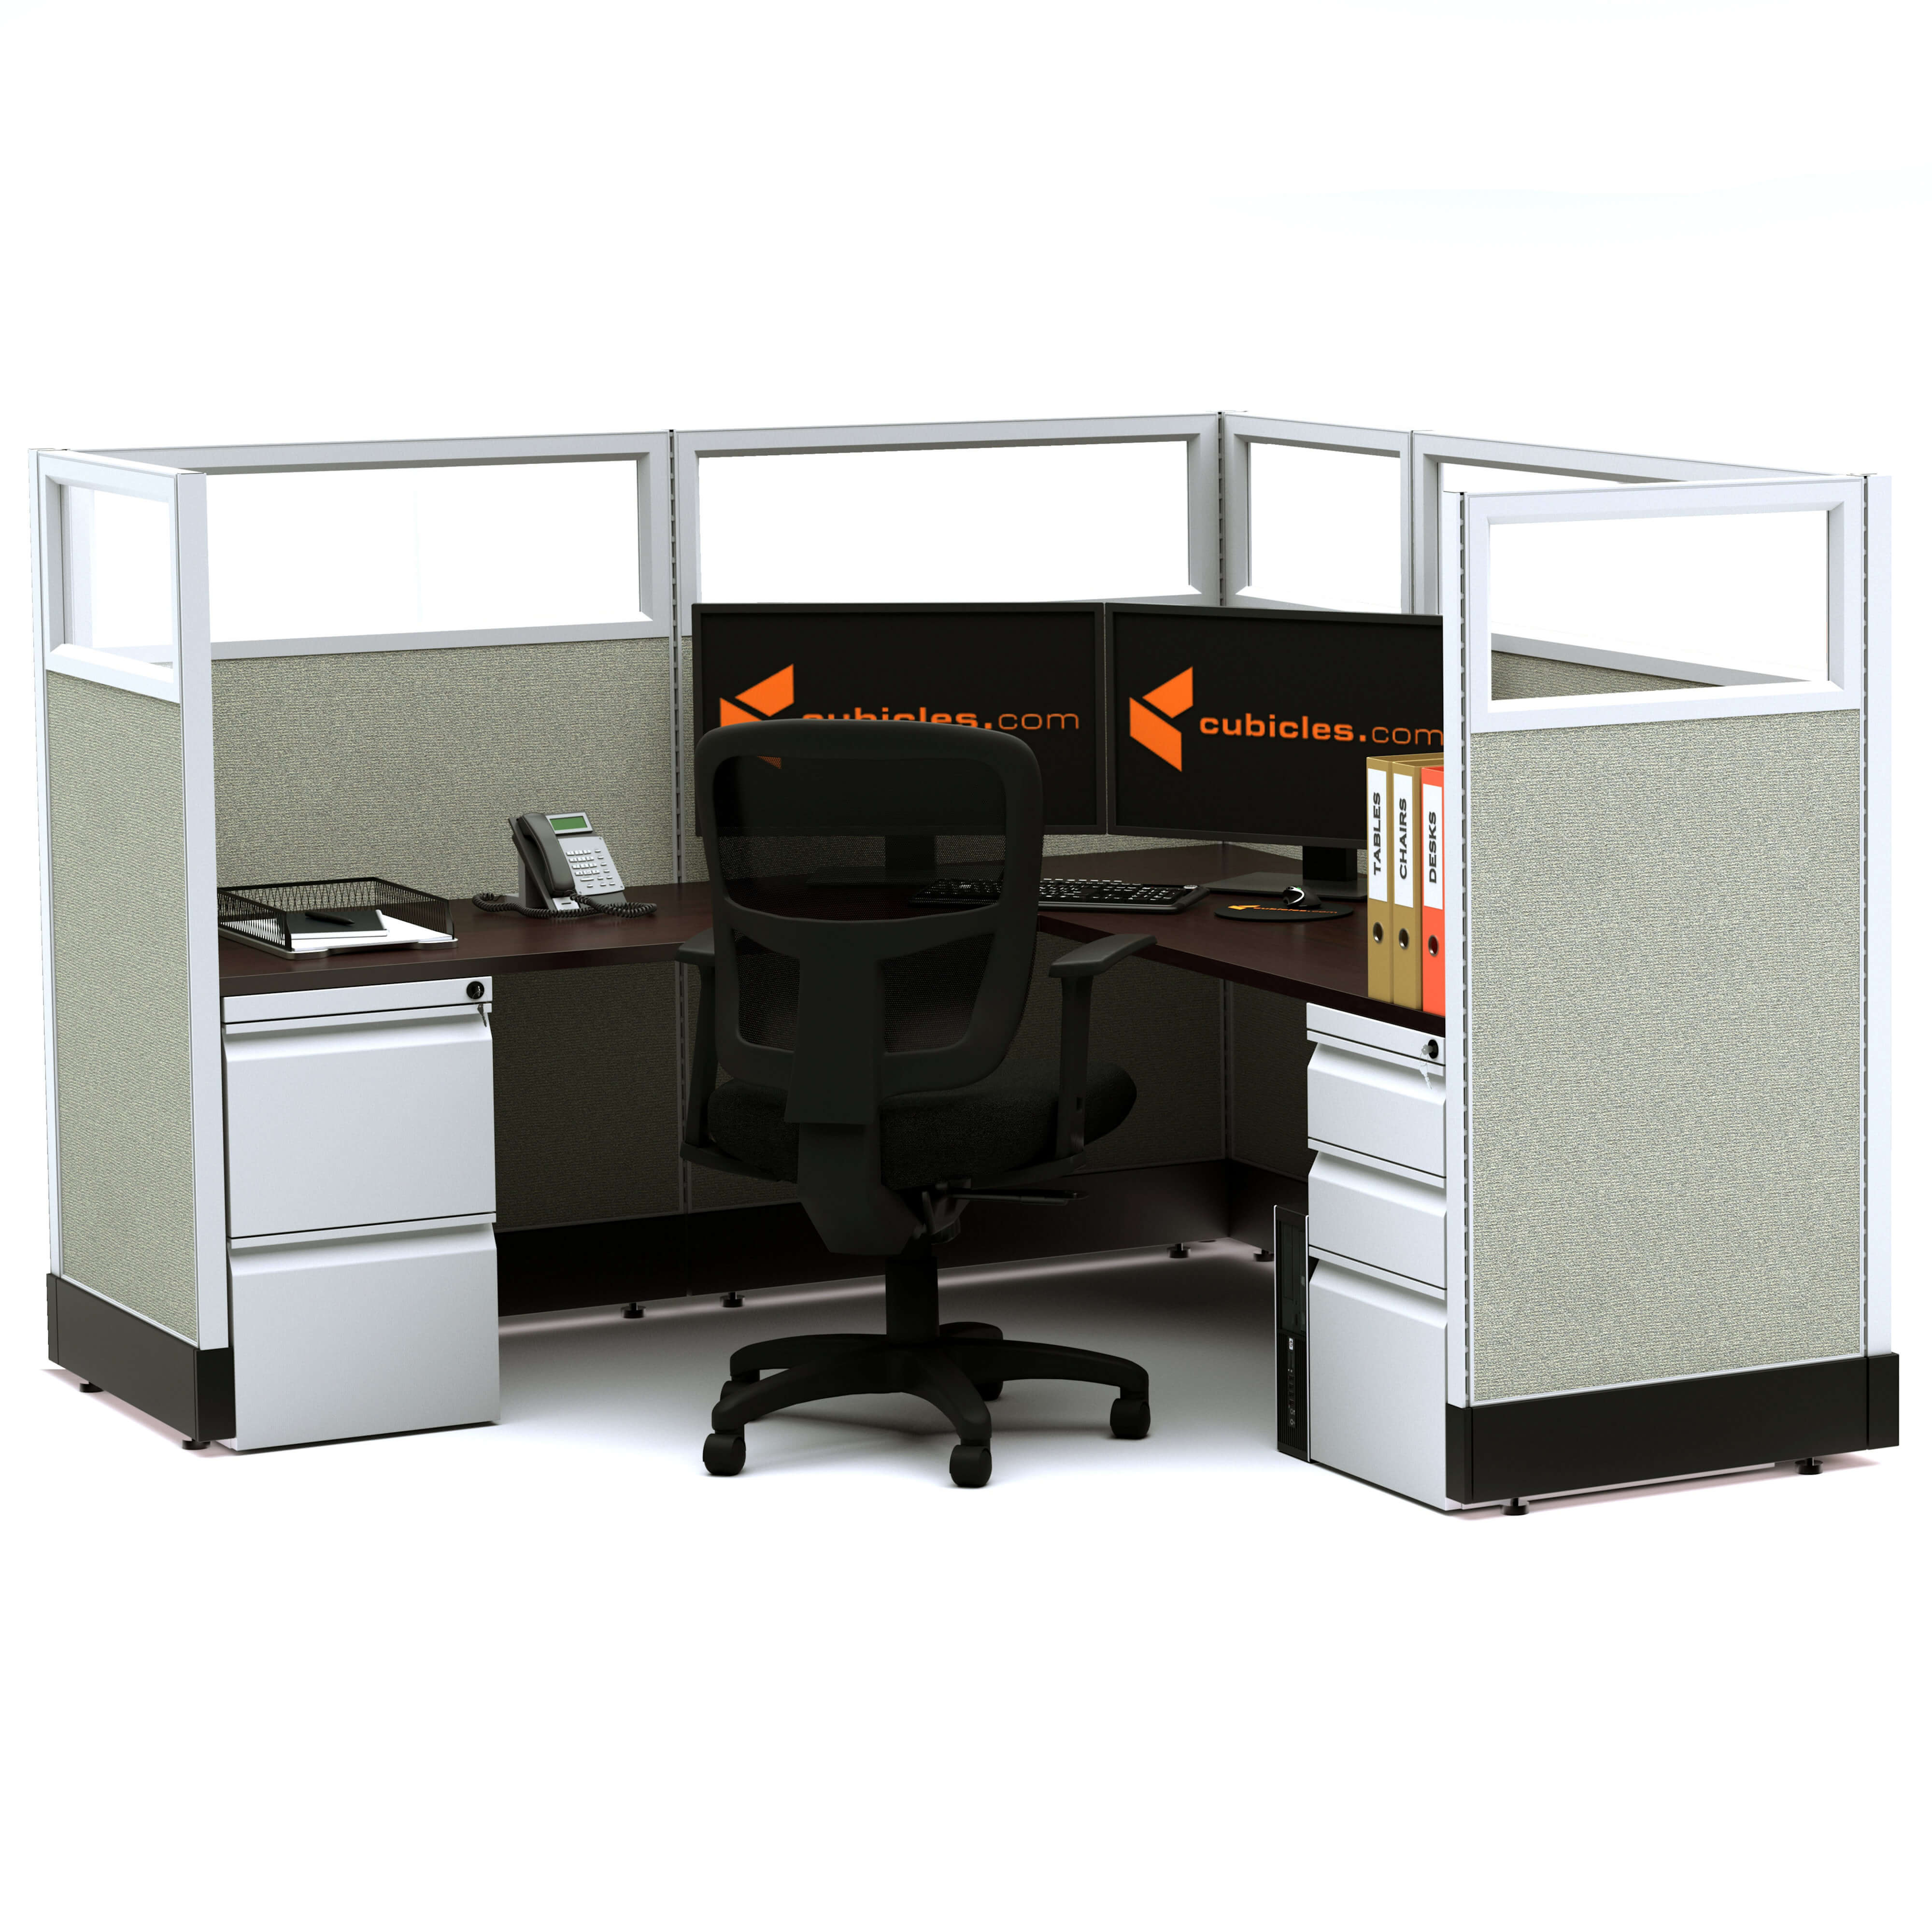 Modular office furniture glass office cubicles single unpowered